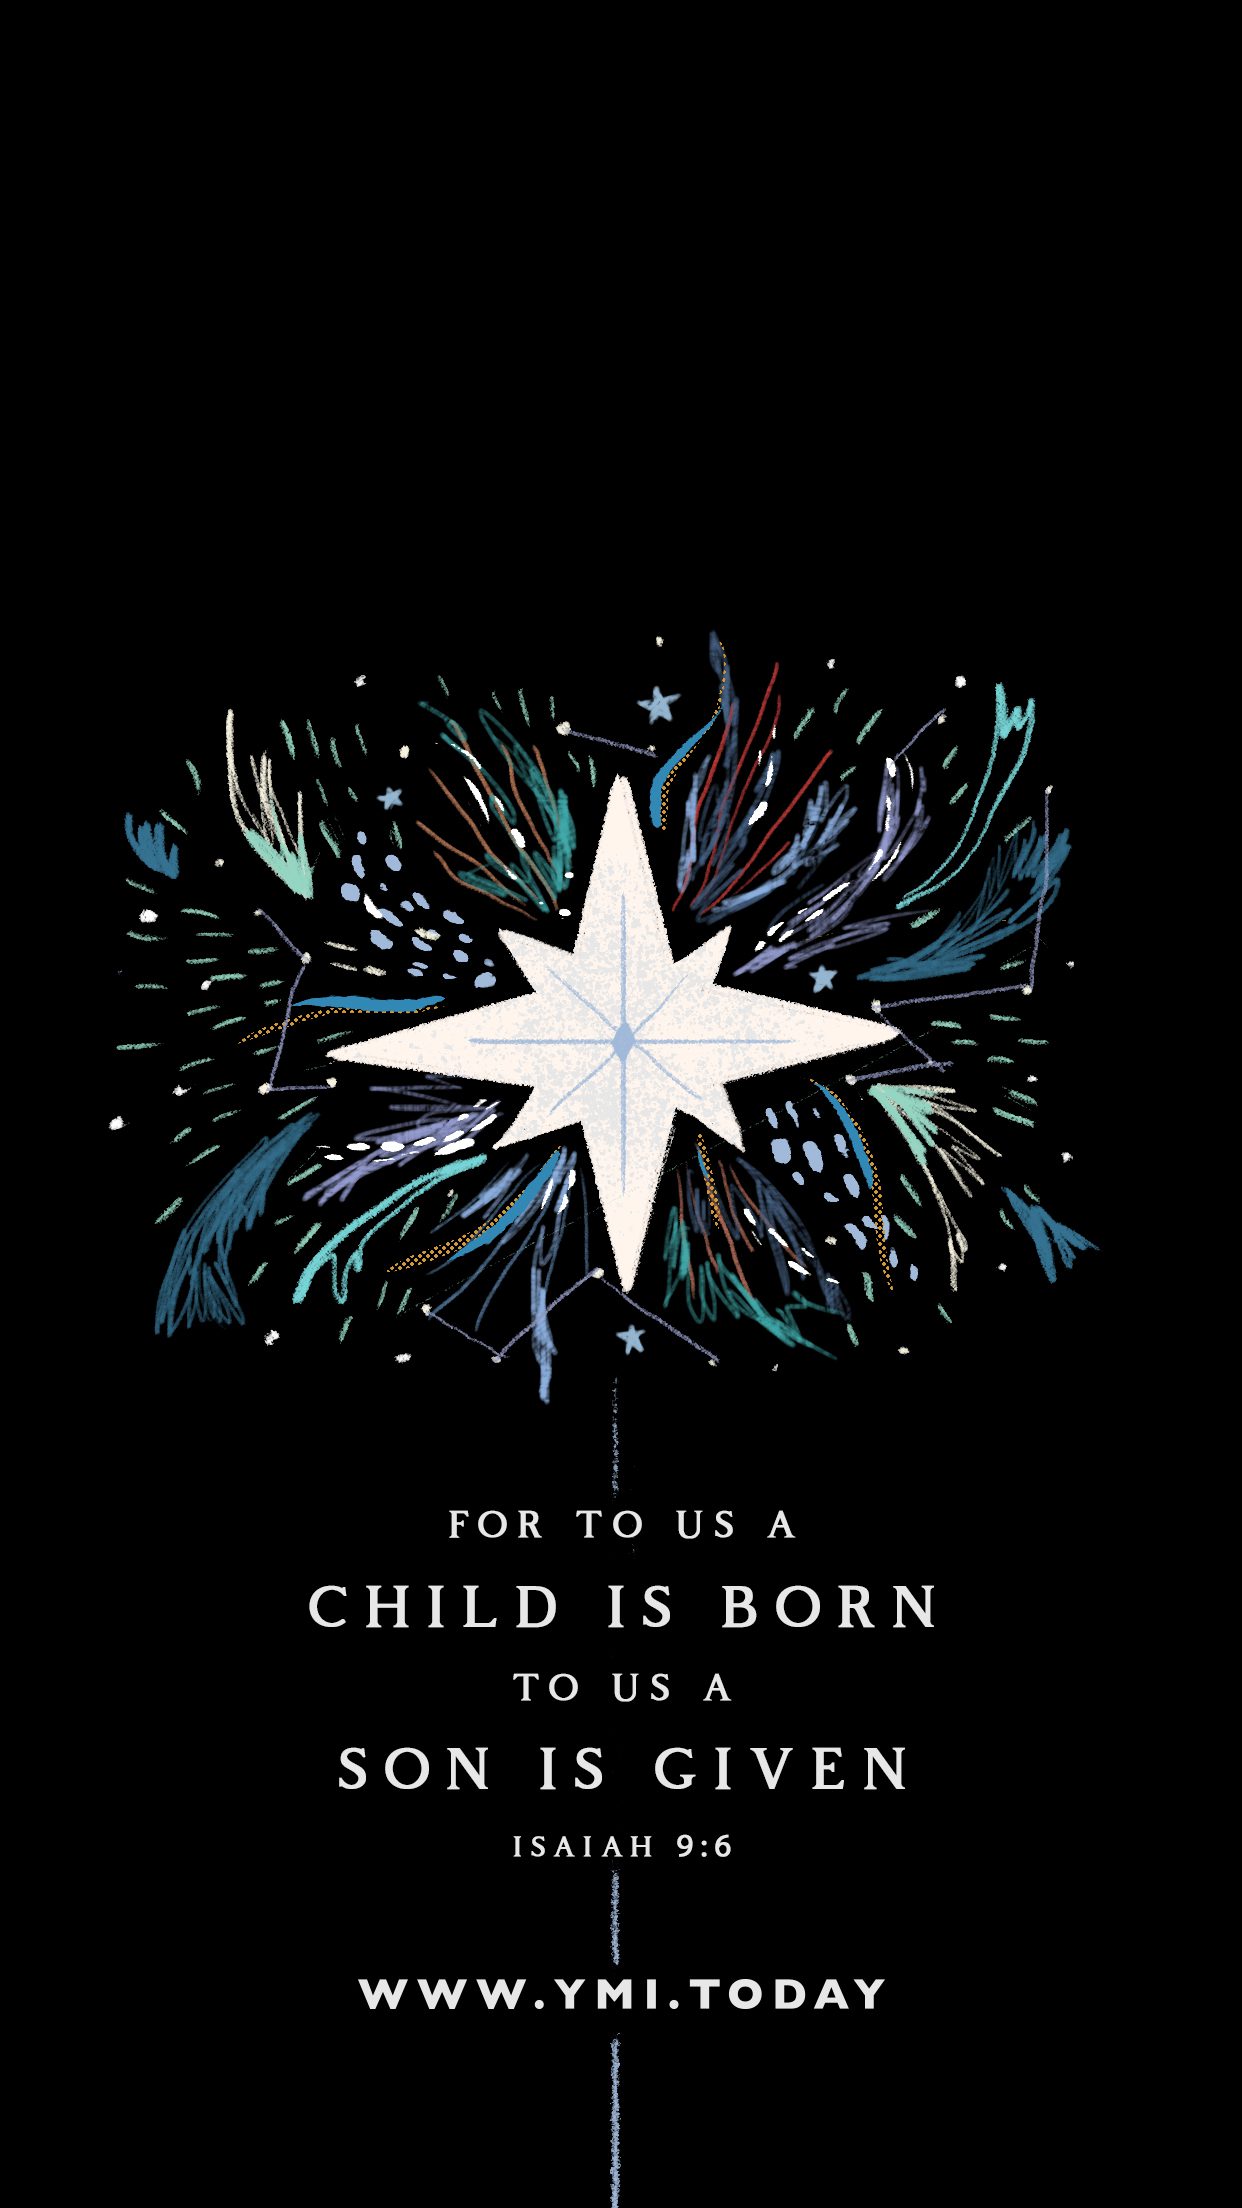 YMI December 2019 Phone Lockscreen - For to us a Child is born, to us a Son is given. - Isaiah 9:6